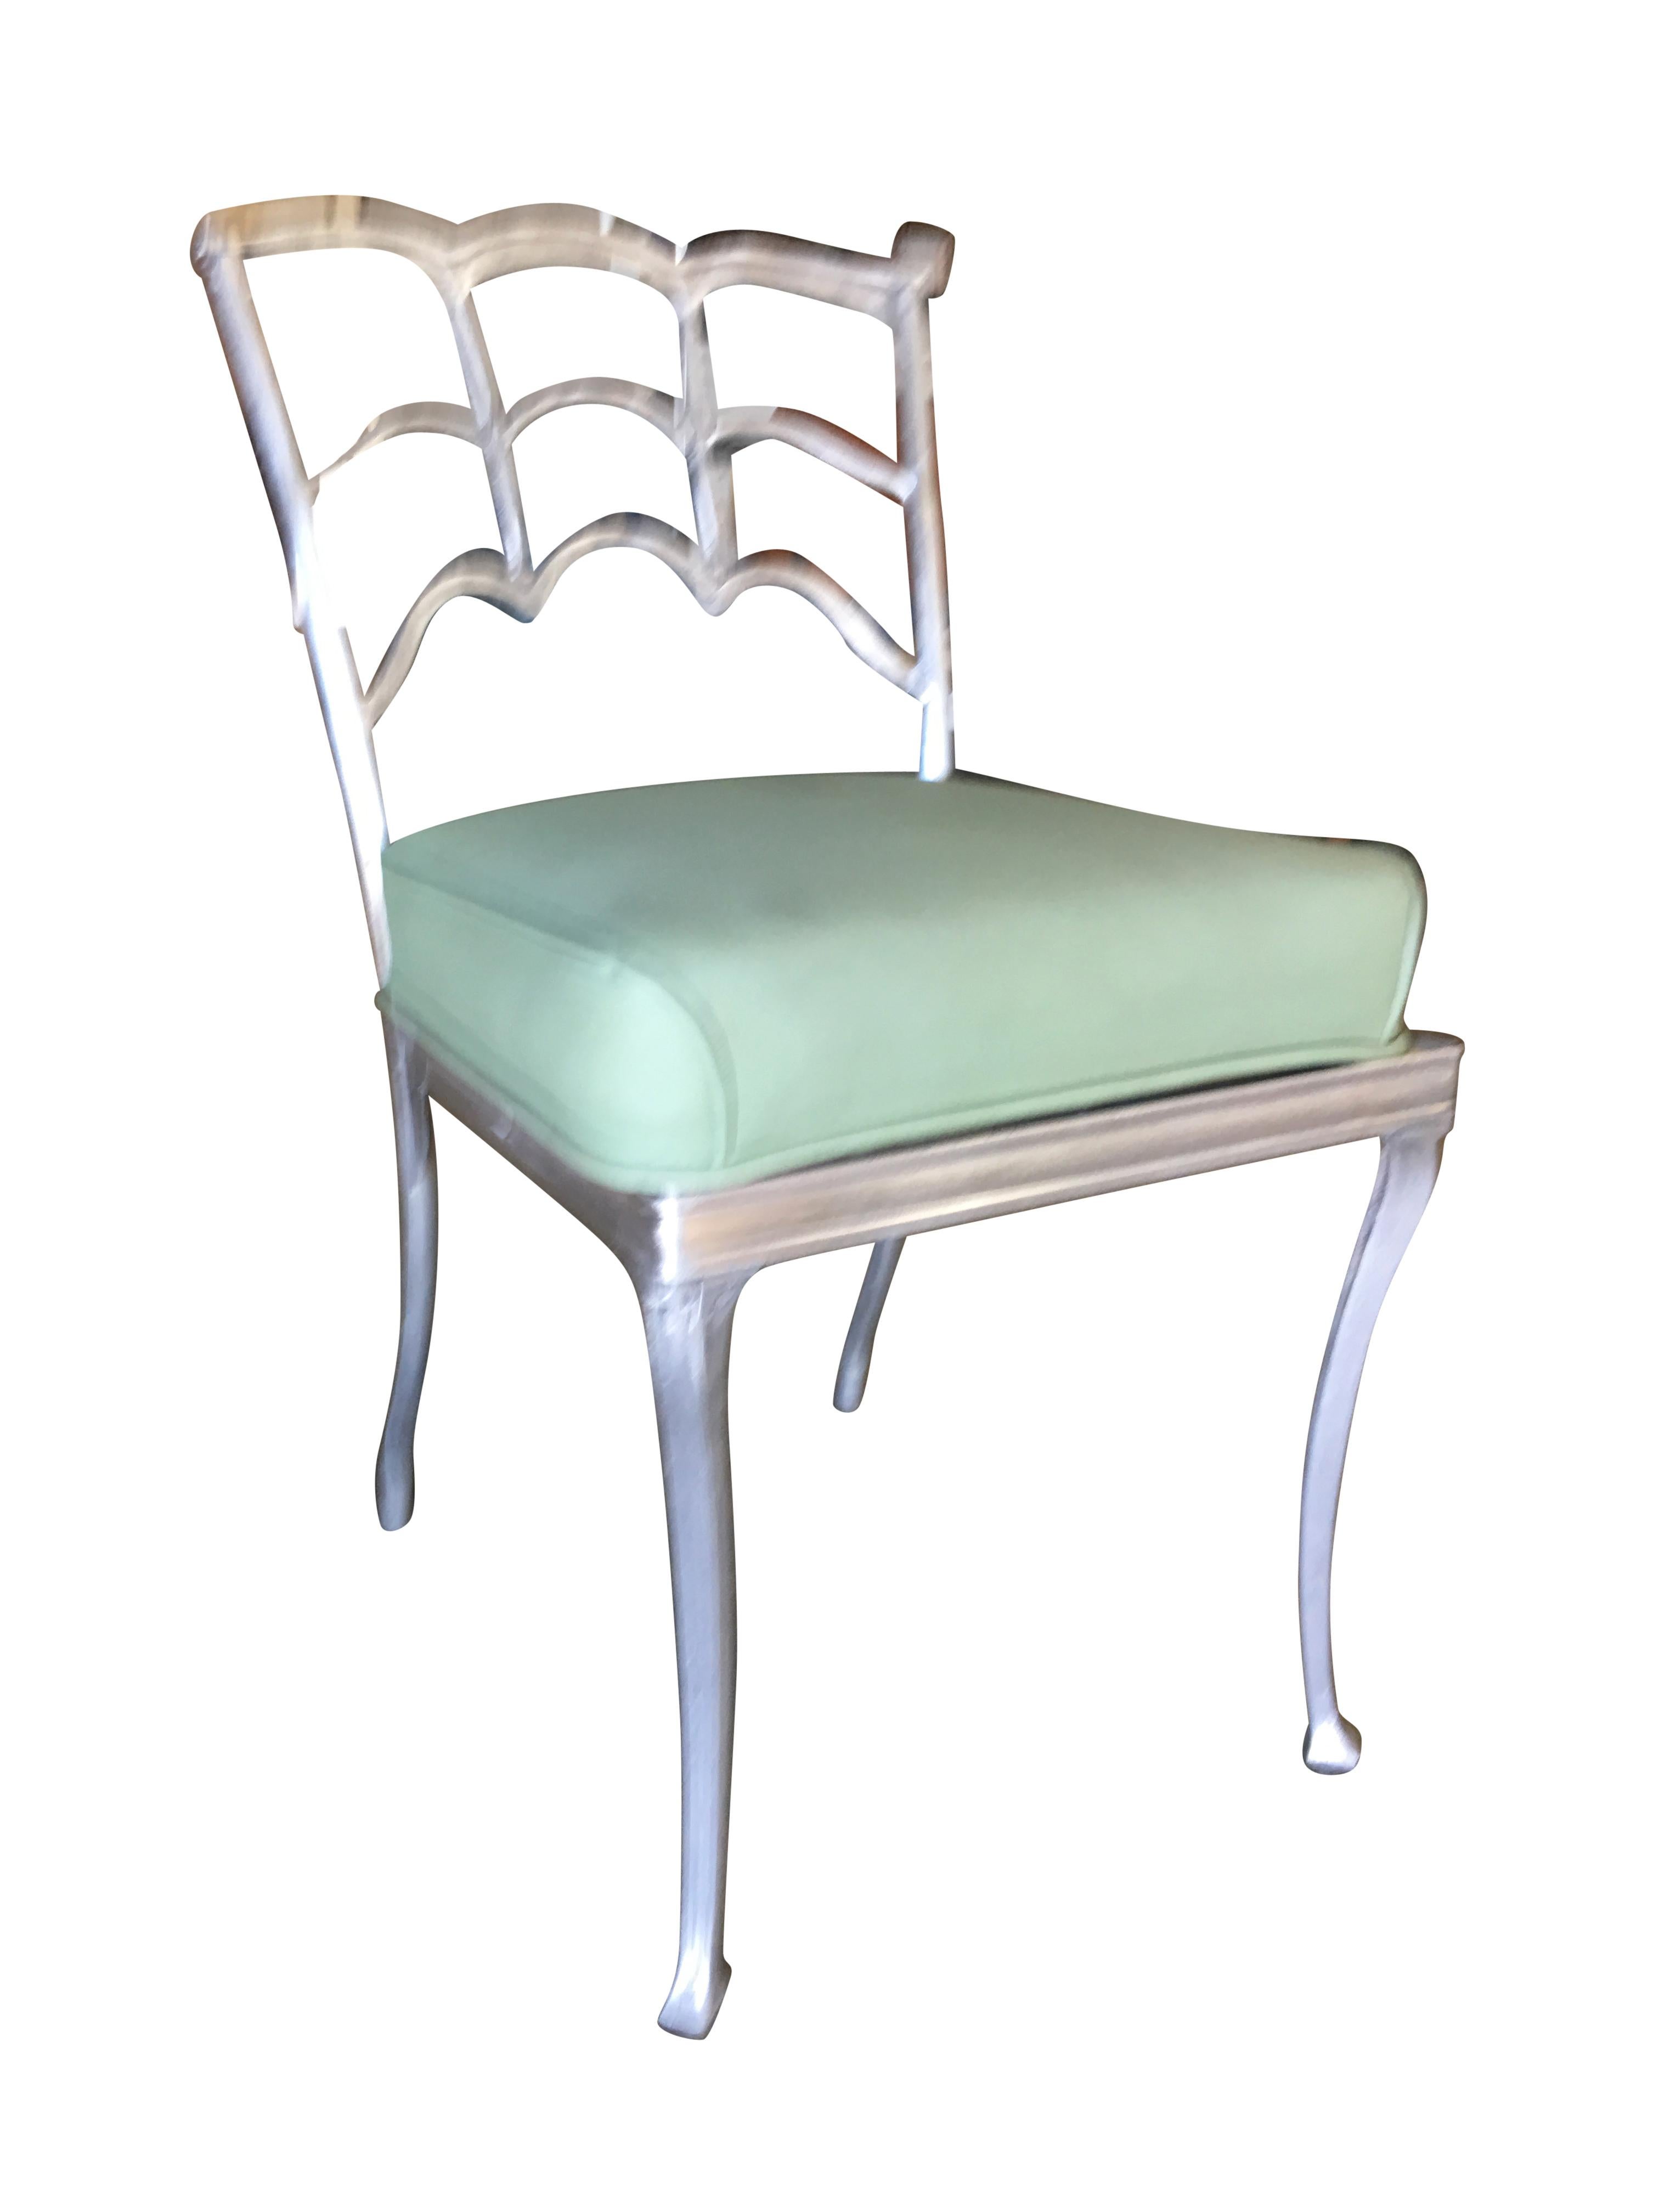 Pair of casted aluminum Art Deco dining side chair with a spiderweb back.